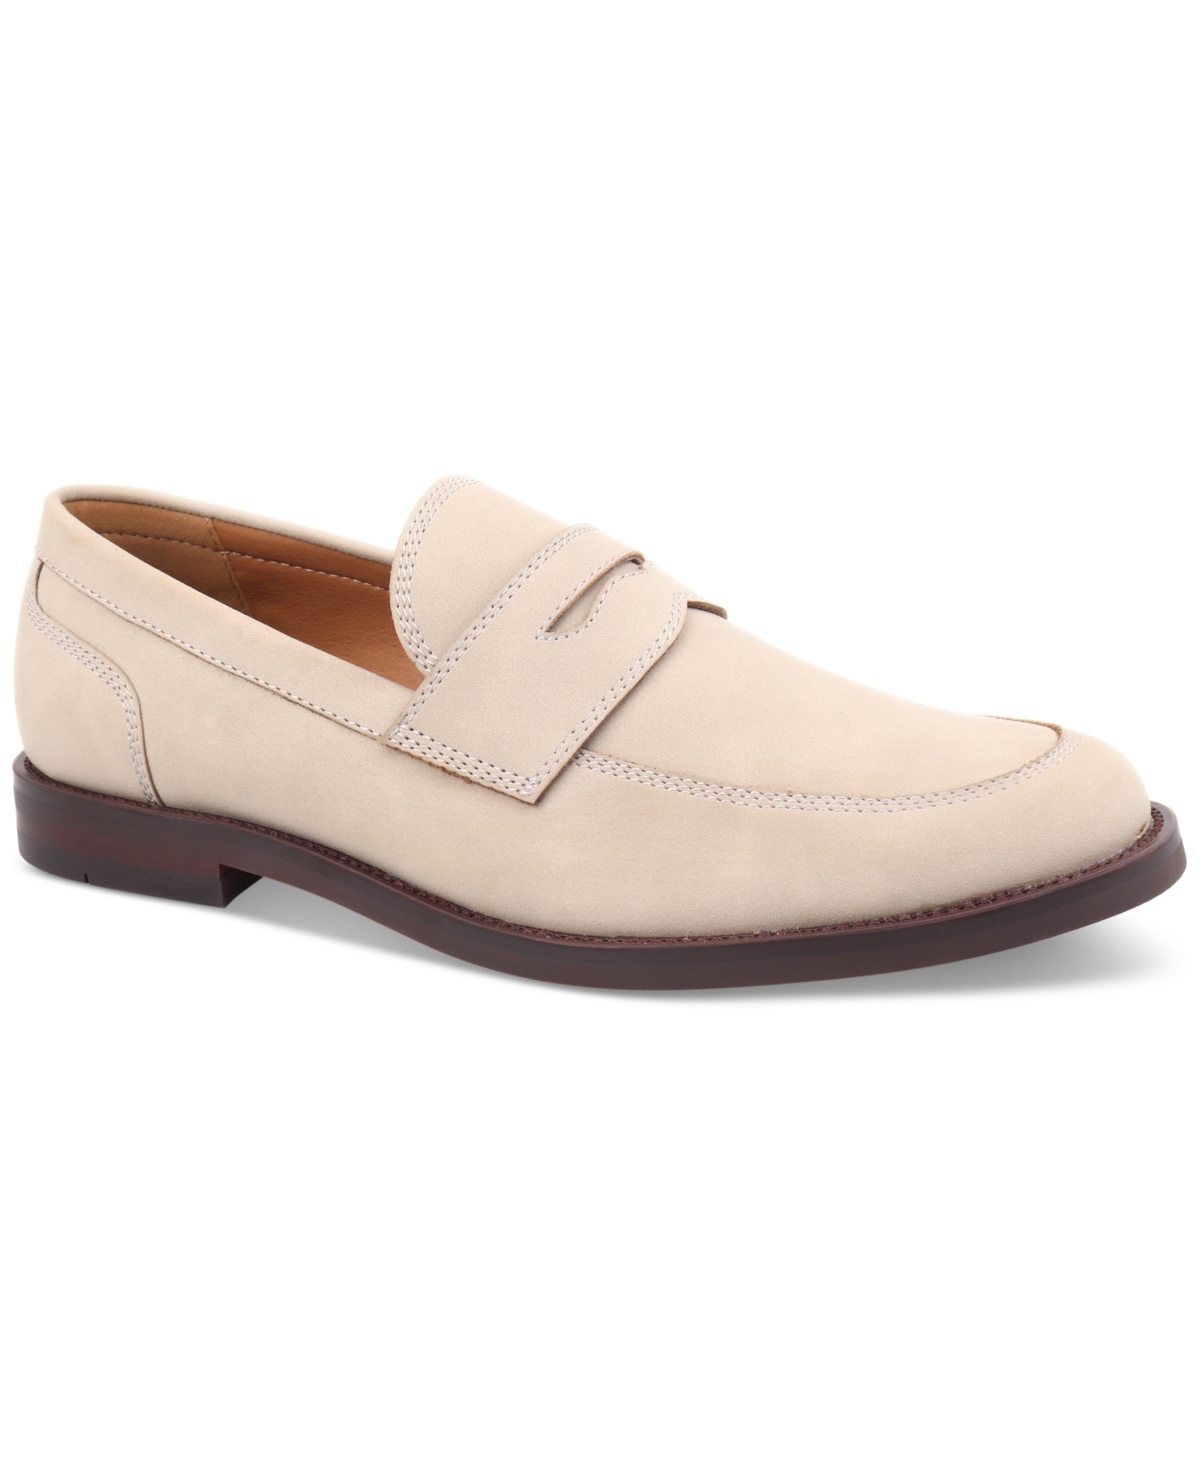 Men's Tobias Slip-On Penny Loafers, Created for Macy's - Sand